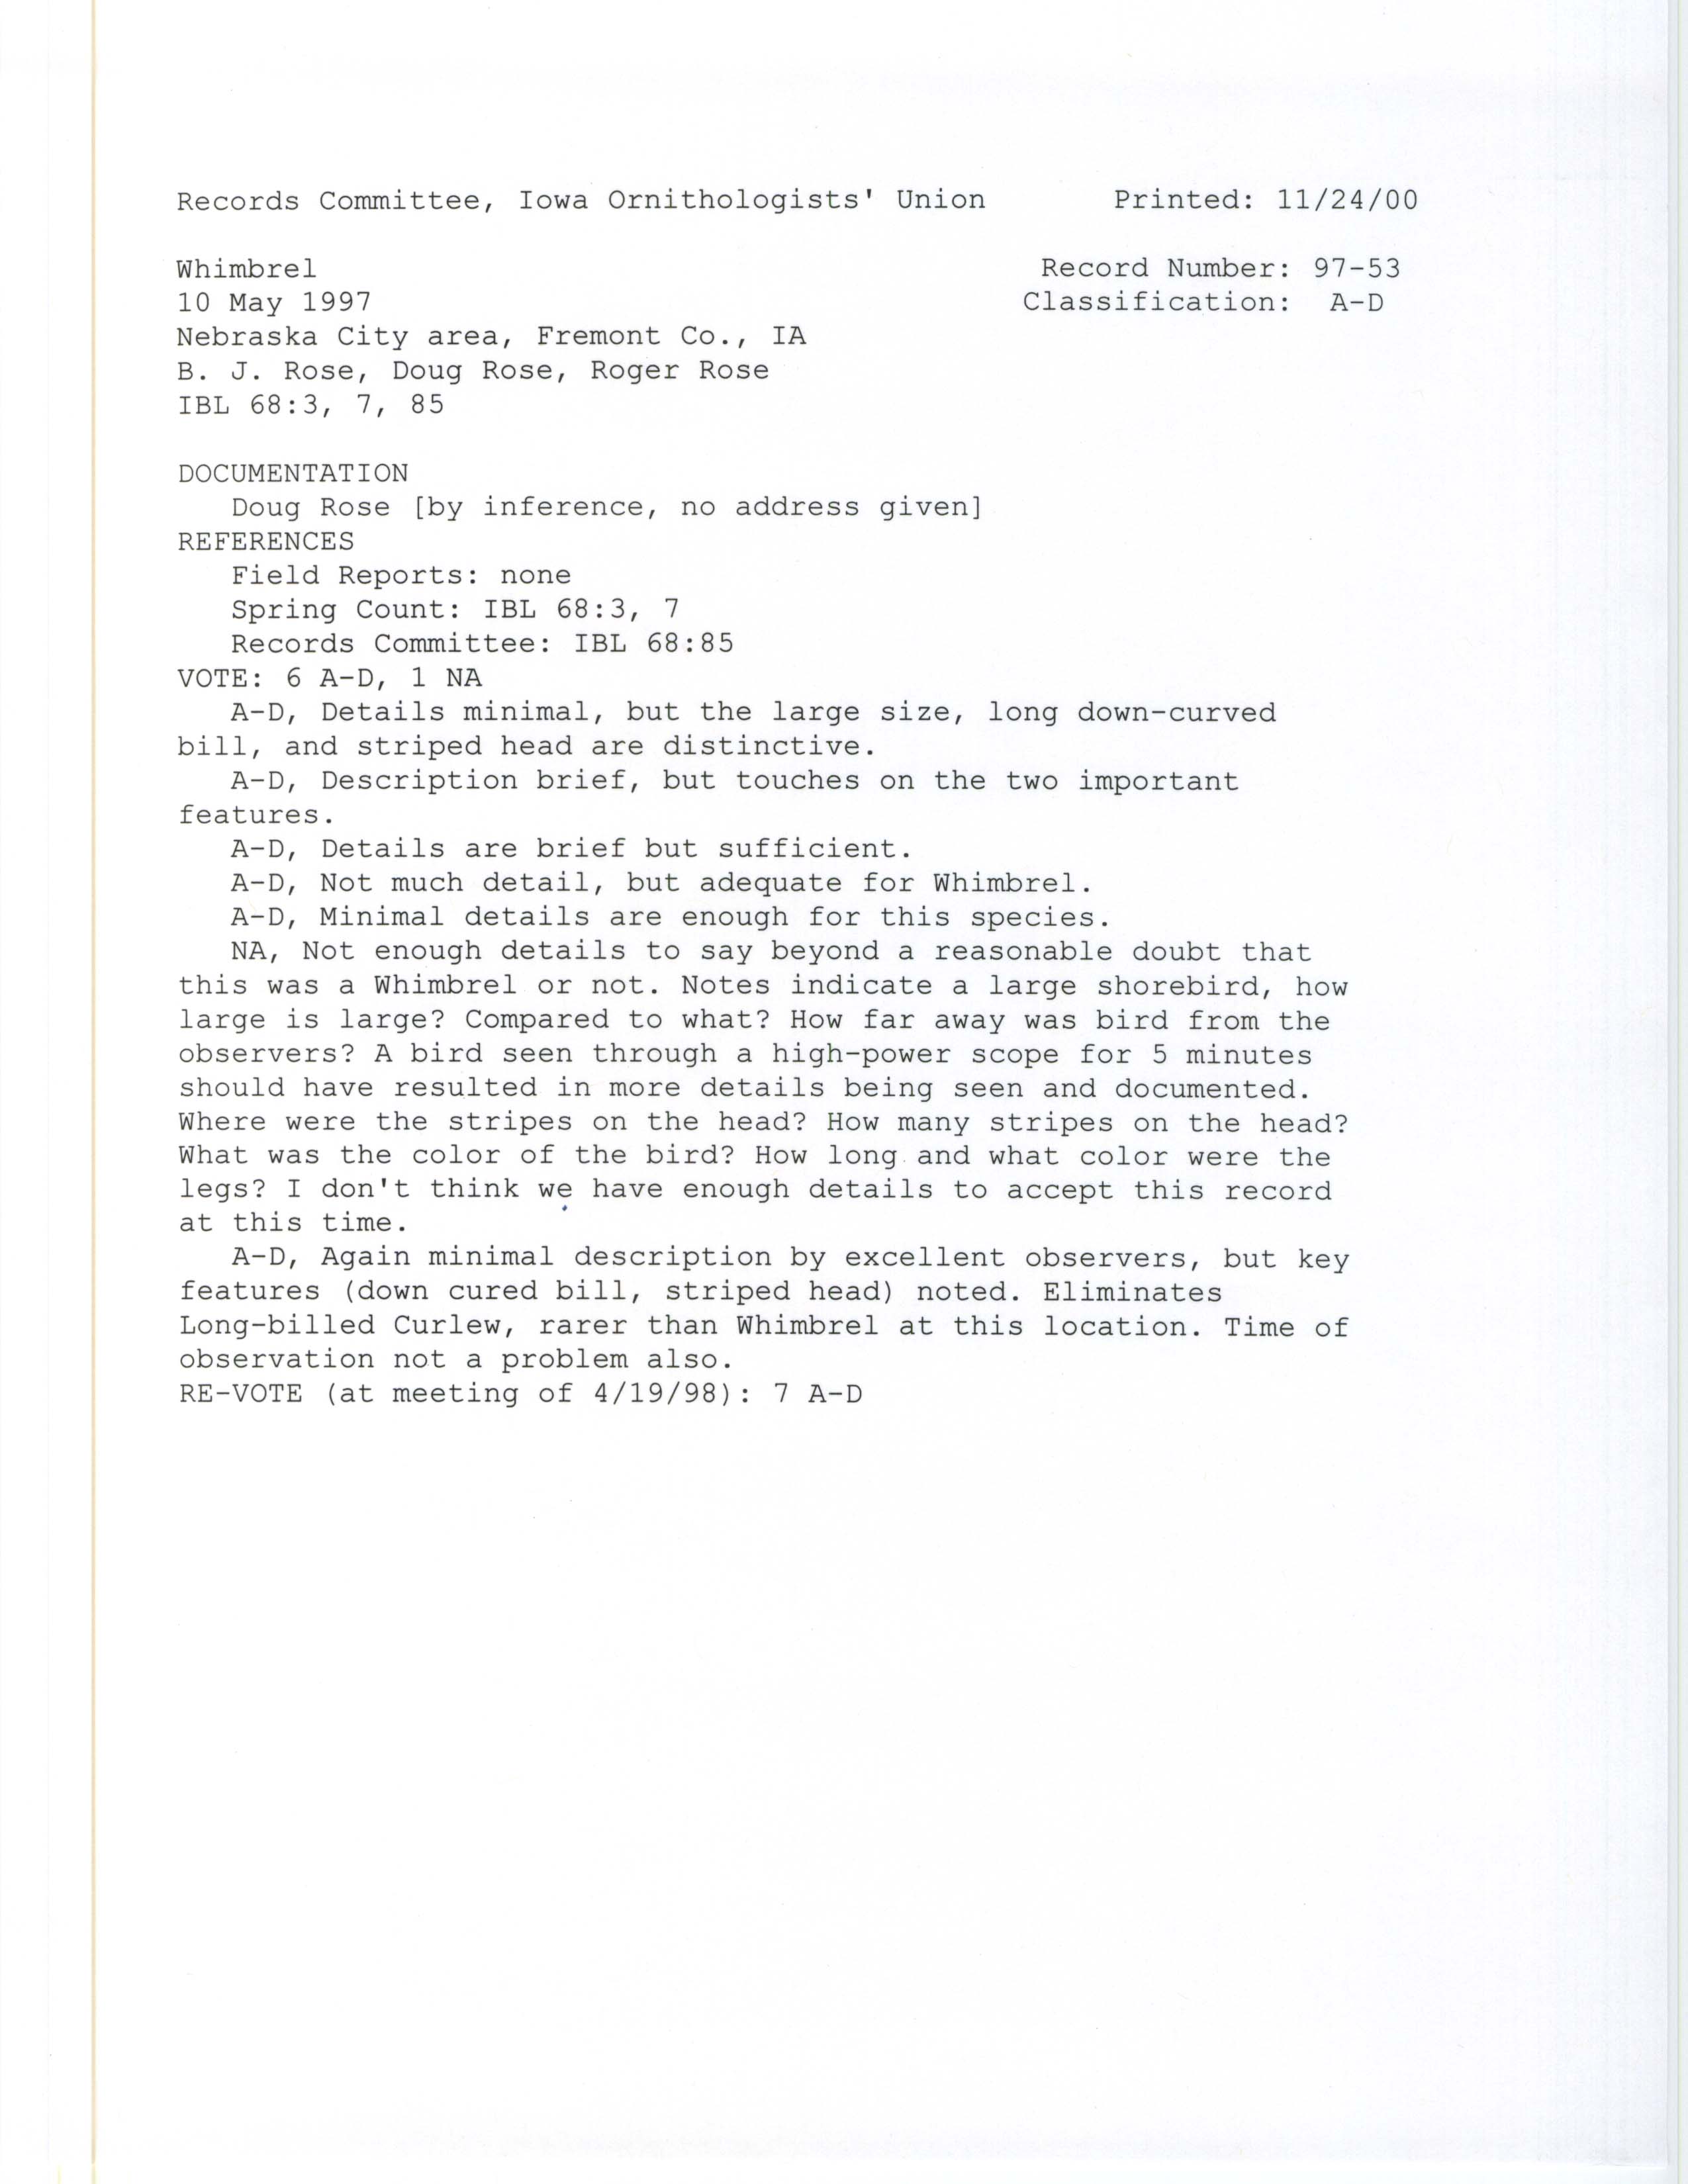 Records Committee review for rare bird sighting for Whimbrel in the Nebraska City area in 1997